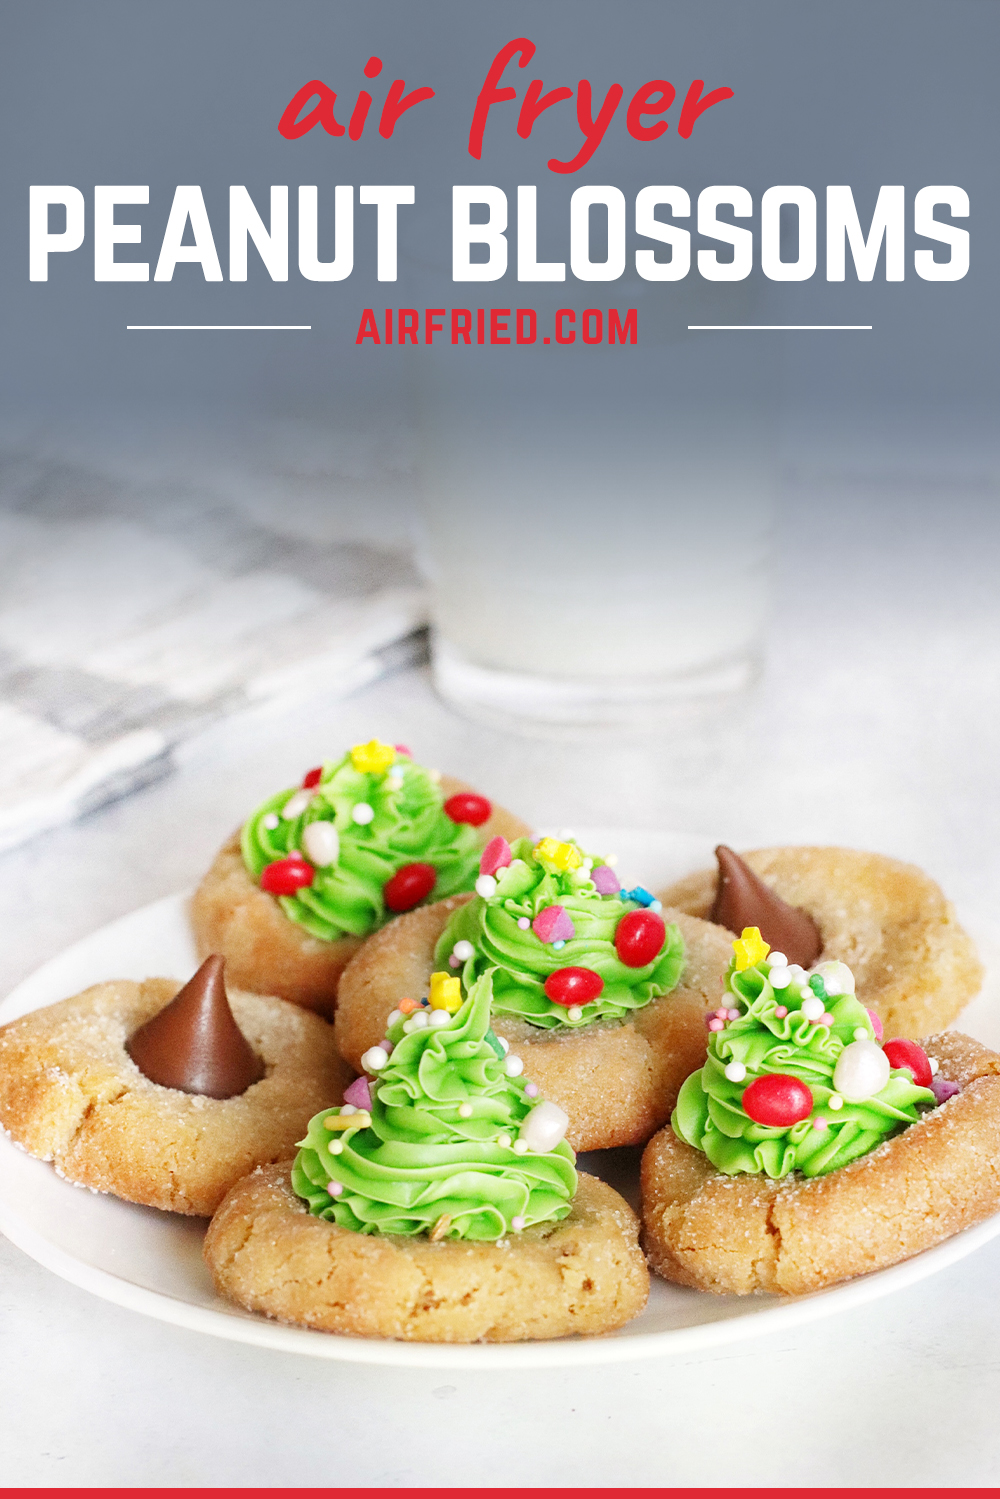 We took the best tasting Christmas cookie and made it pretty by topping them with Christmas trees made out of icing!